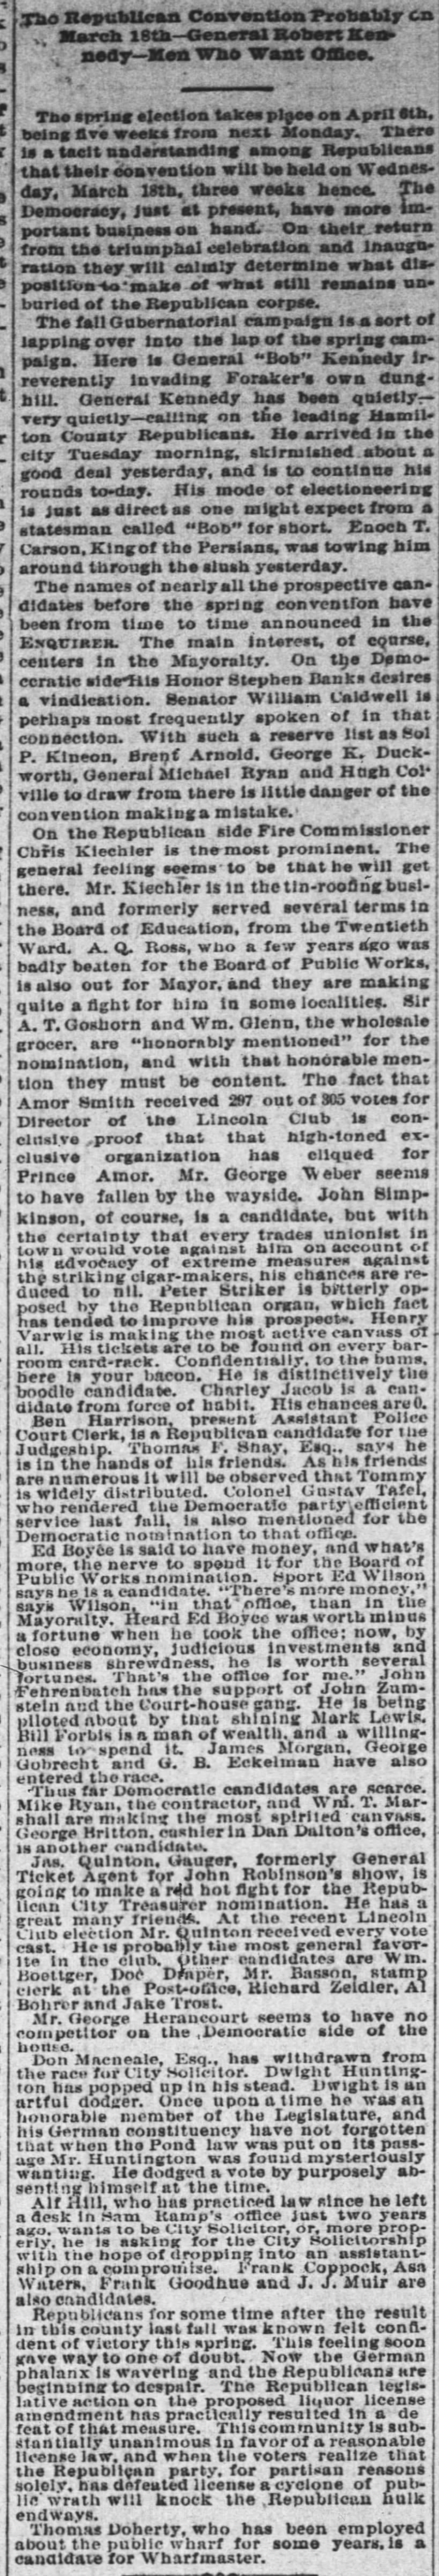 AR listed as Republicans who want office, 26 Feb 1885 Enquirer